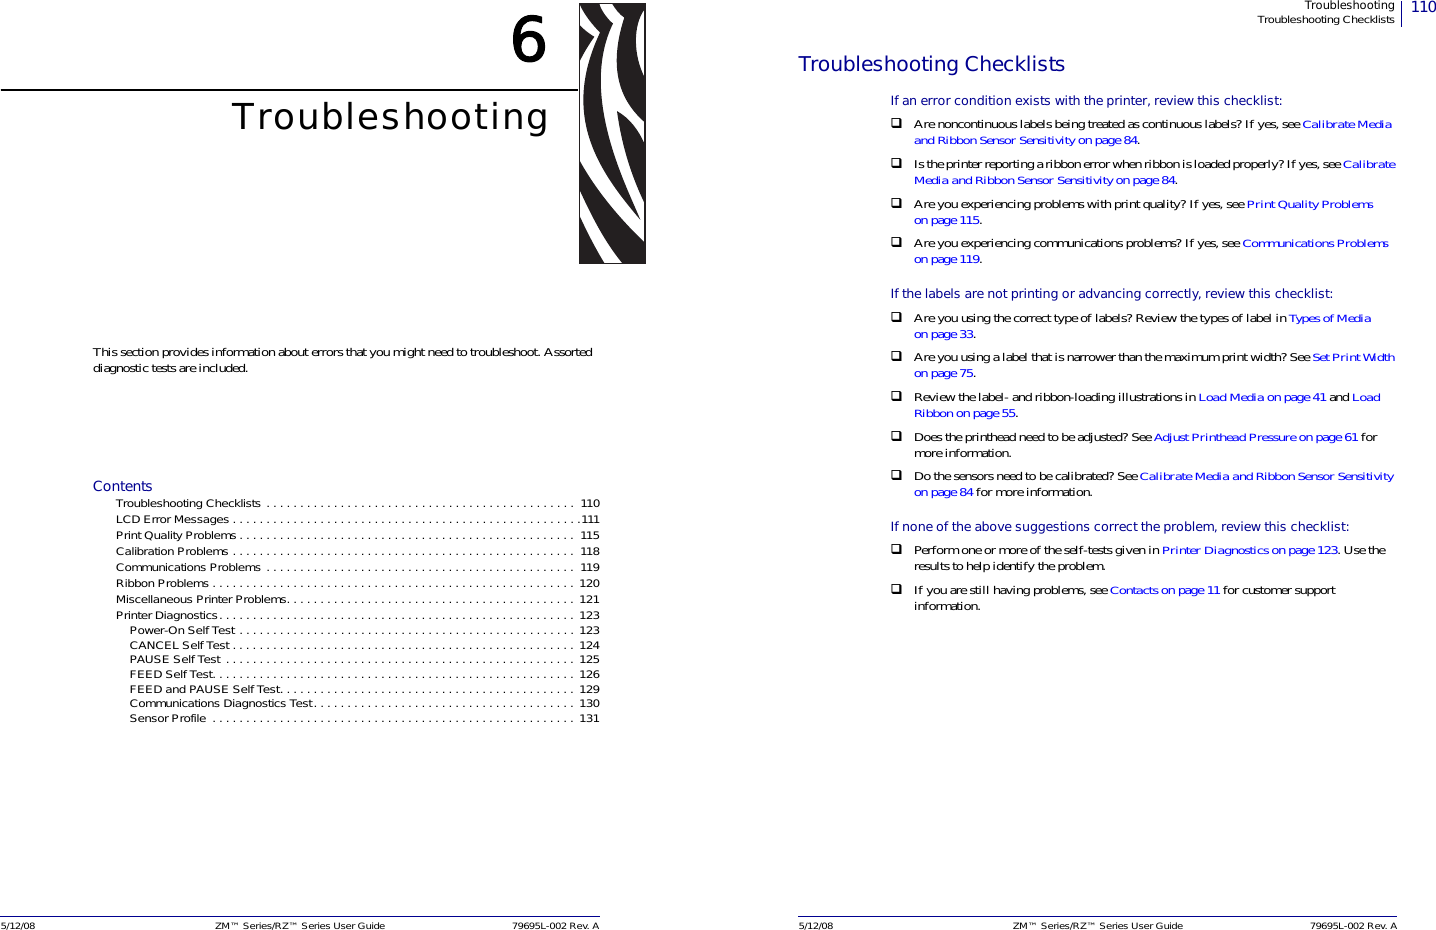 5/12/08 ZM™ Series/RZ™ Series User Guide 79695L-002 Rev. A6TroubleshootingThis section provides information about errors that you might need to troubleshoot. Assorted diagnostic tests are included.ContentsTroubleshooting Checklists . . . . . . . . . . . . . . . . . . . . . . . . . . . . . . . . . . . . . . . . . . . . . .  110LCD Error Messages . . . . . . . . . . . . . . . . . . . . . . . . . . . . . . . . . . . . . . . . . . . . . . . . . . . .111Print Quality Problems . . . . . . . . . . . . . . . . . . . . . . . . . . . . . . . . . . . . . . . . . . . . . . . . . .  115Calibration Problems . . . . . . . . . . . . . . . . . . . . . . . . . . . . . . . . . . . . . . . . . . . . . . . . . . .  118 Communications Problems . . . . . . . . . . . . . . . . . . . . . . . . . . . . . . . . . . . . . . . . . . . . . .  119Ribbon Problems . . . . . . . . . . . . . . . . . . . . . . . . . . . . . . . . . . . . . . . . . . . . . . . . . . . . . . 120Miscellaneous Printer Problems. . . . . . . . . . . . . . . . . . . . . . . . . . . . . . . . . . . . . . . . . . . 121Printer Diagnostics. . . . . . . . . . . . . . . . . . . . . . . . . . . . . . . . . . . . . . . . . . . . . . . . . . . . . 123Power-On Self Test . . . . . . . . . . . . . . . . . . . . . . . . . . . . . . . . . . . . . . . . . . . . . . . . . . 123CANCEL Self Test . . . . . . . . . . . . . . . . . . . . . . . . . . . . . . . . . . . . . . . . . . . . . . . . . . . 124PAUSE Self Test  . . . . . . . . . . . . . . . . . . . . . . . . . . . . . . . . . . . . . . . . . . . . . . . . . . . . 125FEED Self Test. . . . . . . . . . . . . . . . . . . . . . . . . . . . . . . . . . . . . . . . . . . . . . . . . . . . . . 126FEED and PAUSE Self Test. . . . . . . . . . . . . . . . . . . . . . . . . . . . . . . . . . . . . . . . . . . . 129Communications Diagnostics Test. . . . . . . . . . . . . . . . . . . . . . . . . . . . . . . . . . . . . . . 130Sensor Profile  . . . . . . . . . . . . . . . . . . . . . . . . . . . . . . . . . . . . . . . . . . . . . . . . . . . . . . 131110TroubleshootingTroubleshooting Checklists5/12/08 ZM™ Series/RZ™ Series User Guide 79695L-002 Rev. ATroubleshooting ChecklistsIf an error condition exists with the printer, review this checklist:Are noncontinuous labels being treated as continuous labels? If yes, see Calibrate Media and Ribbon Sensor Sensitivity on page 84.Is the printer reporting a ribbon error when ribbon is loaded properly? If yes, see Calibrate Media and Ribbon Sensor Sensitivity on page 84.Are you experiencing problems with print quality? If yes, see Print Quality Problemson page 115.Are you experiencing communications problems? If yes, see Communications Problemson page 119.If the labels are not printing or advancing correctly, review this checklist:Are you using the correct type of labels? Review the types of label in Types of Mediaon page 33.Are you using a label that is narrower than the maximum print width? See Set Print Widthon page 75.Review the label- and ribbon-loading illustrations in Load Media on page 41 and Load Ribbon on page 55.Does the printhead need to be adjusted? See Adjust Printhead Pressure on page 61 for more information.Do the sensors need to be calibrated? See Calibrate Media and Ribbon Sensor Sensitivityon page 84 for more information.If none of the above suggestions correct the problem, review this checklist:Perform one or more of the self-tests given in Printer Diagnostics on page 123. Use the results to help identify the problem.If you are still having problems, see Contacts on page 11 for customer support information.